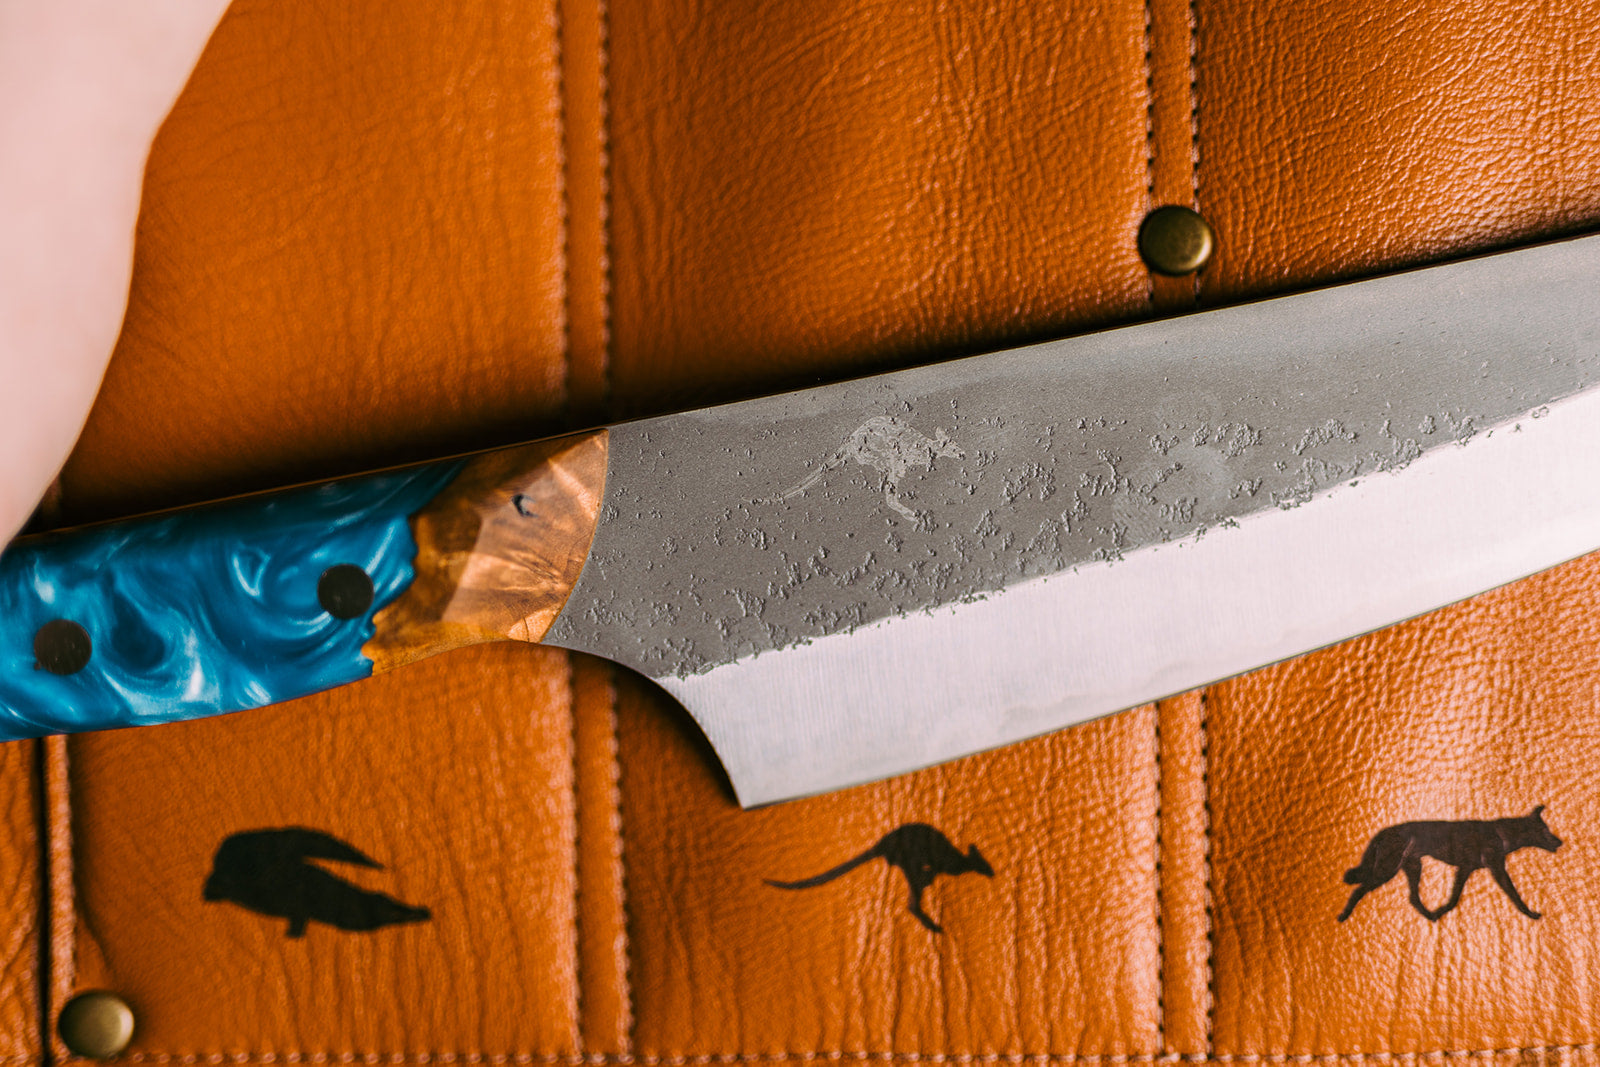 The Best Aussie-Inspired Knives